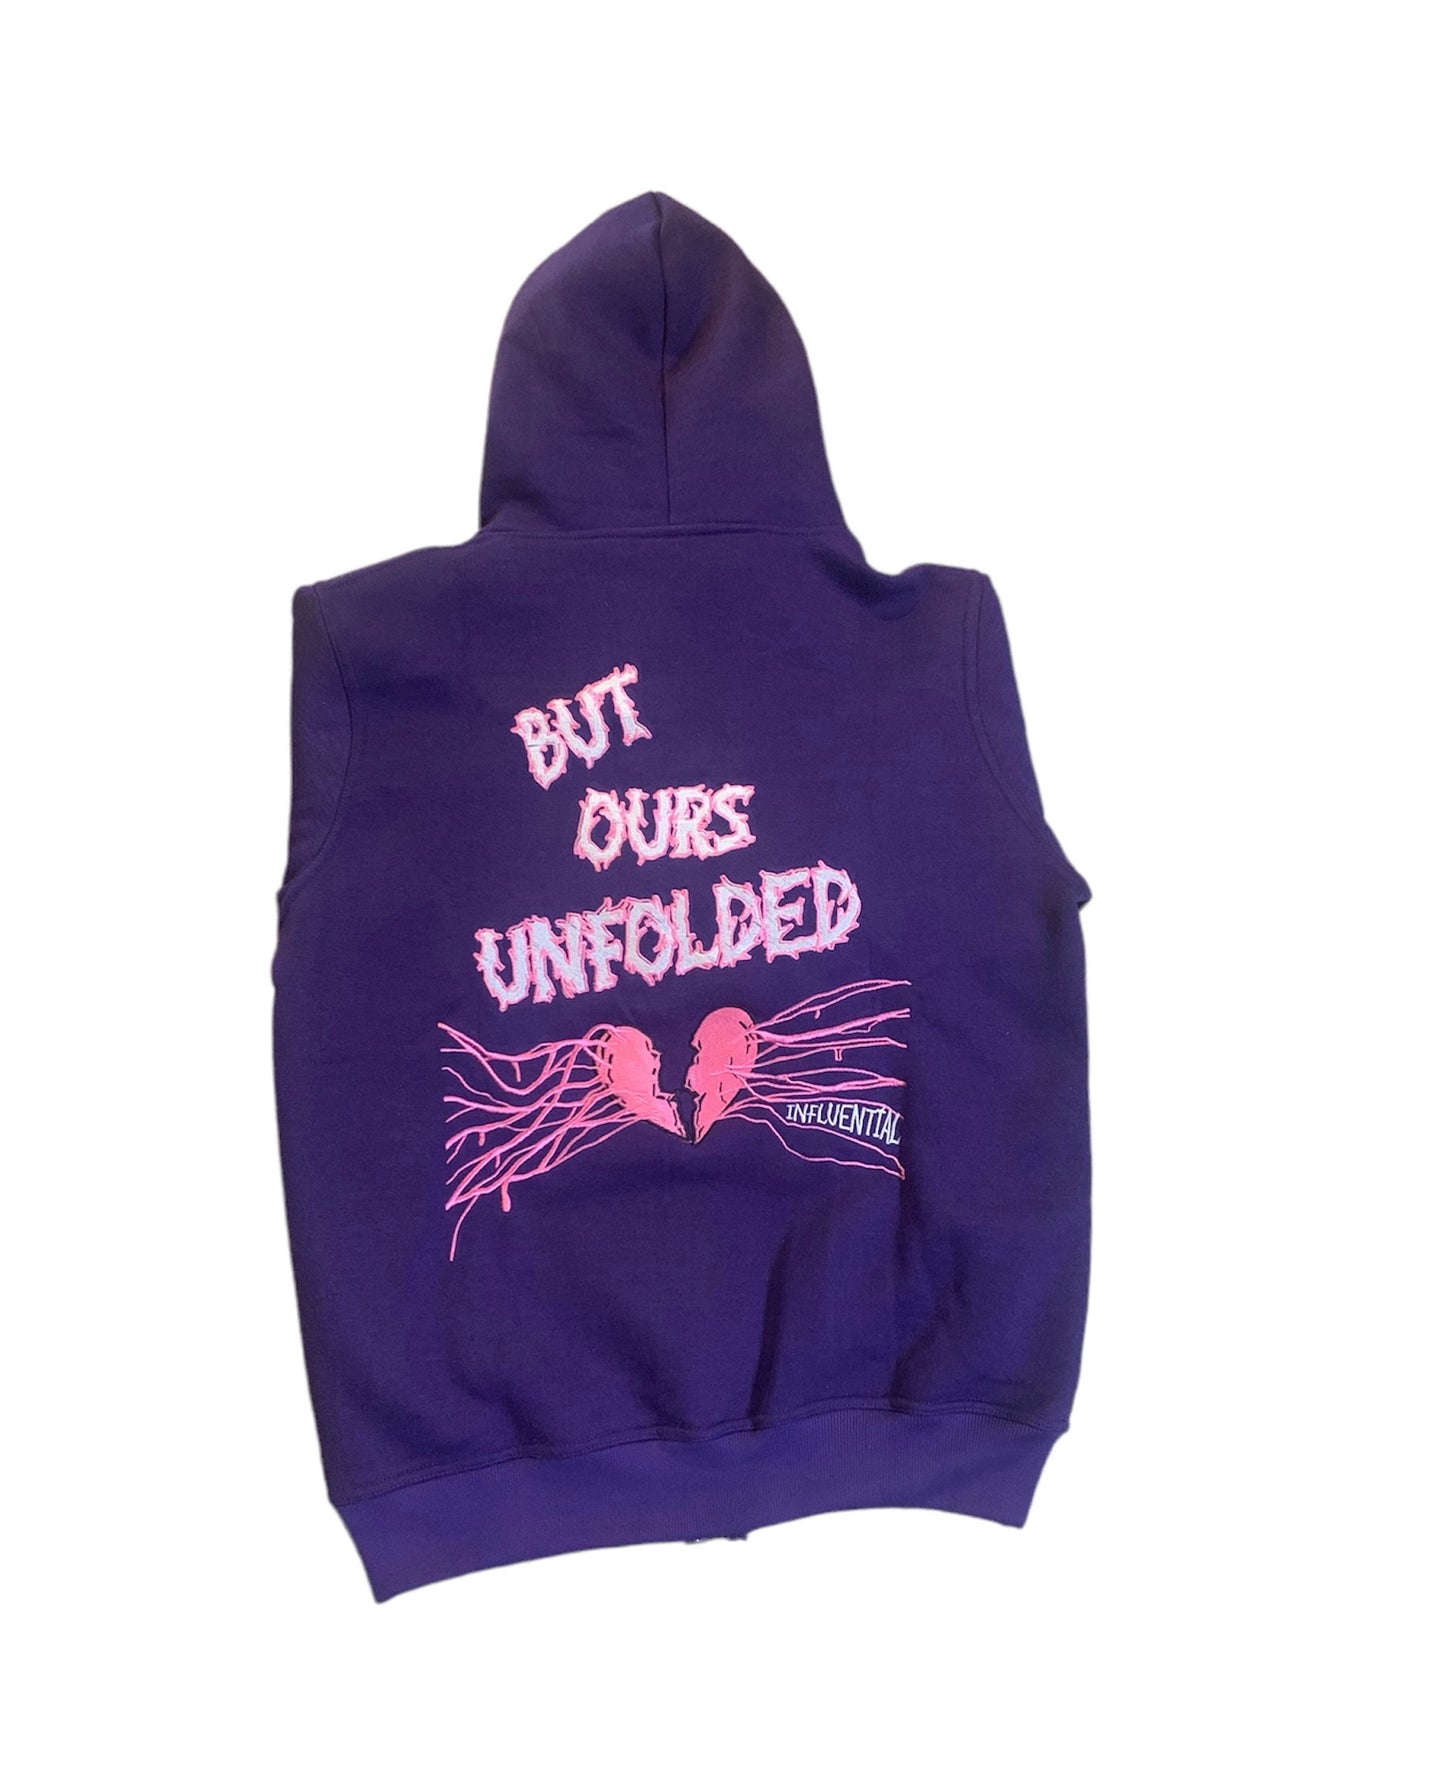 INFLUENTIAL 'SOULTIES' FULL-ZIP PURPLE AND PINK